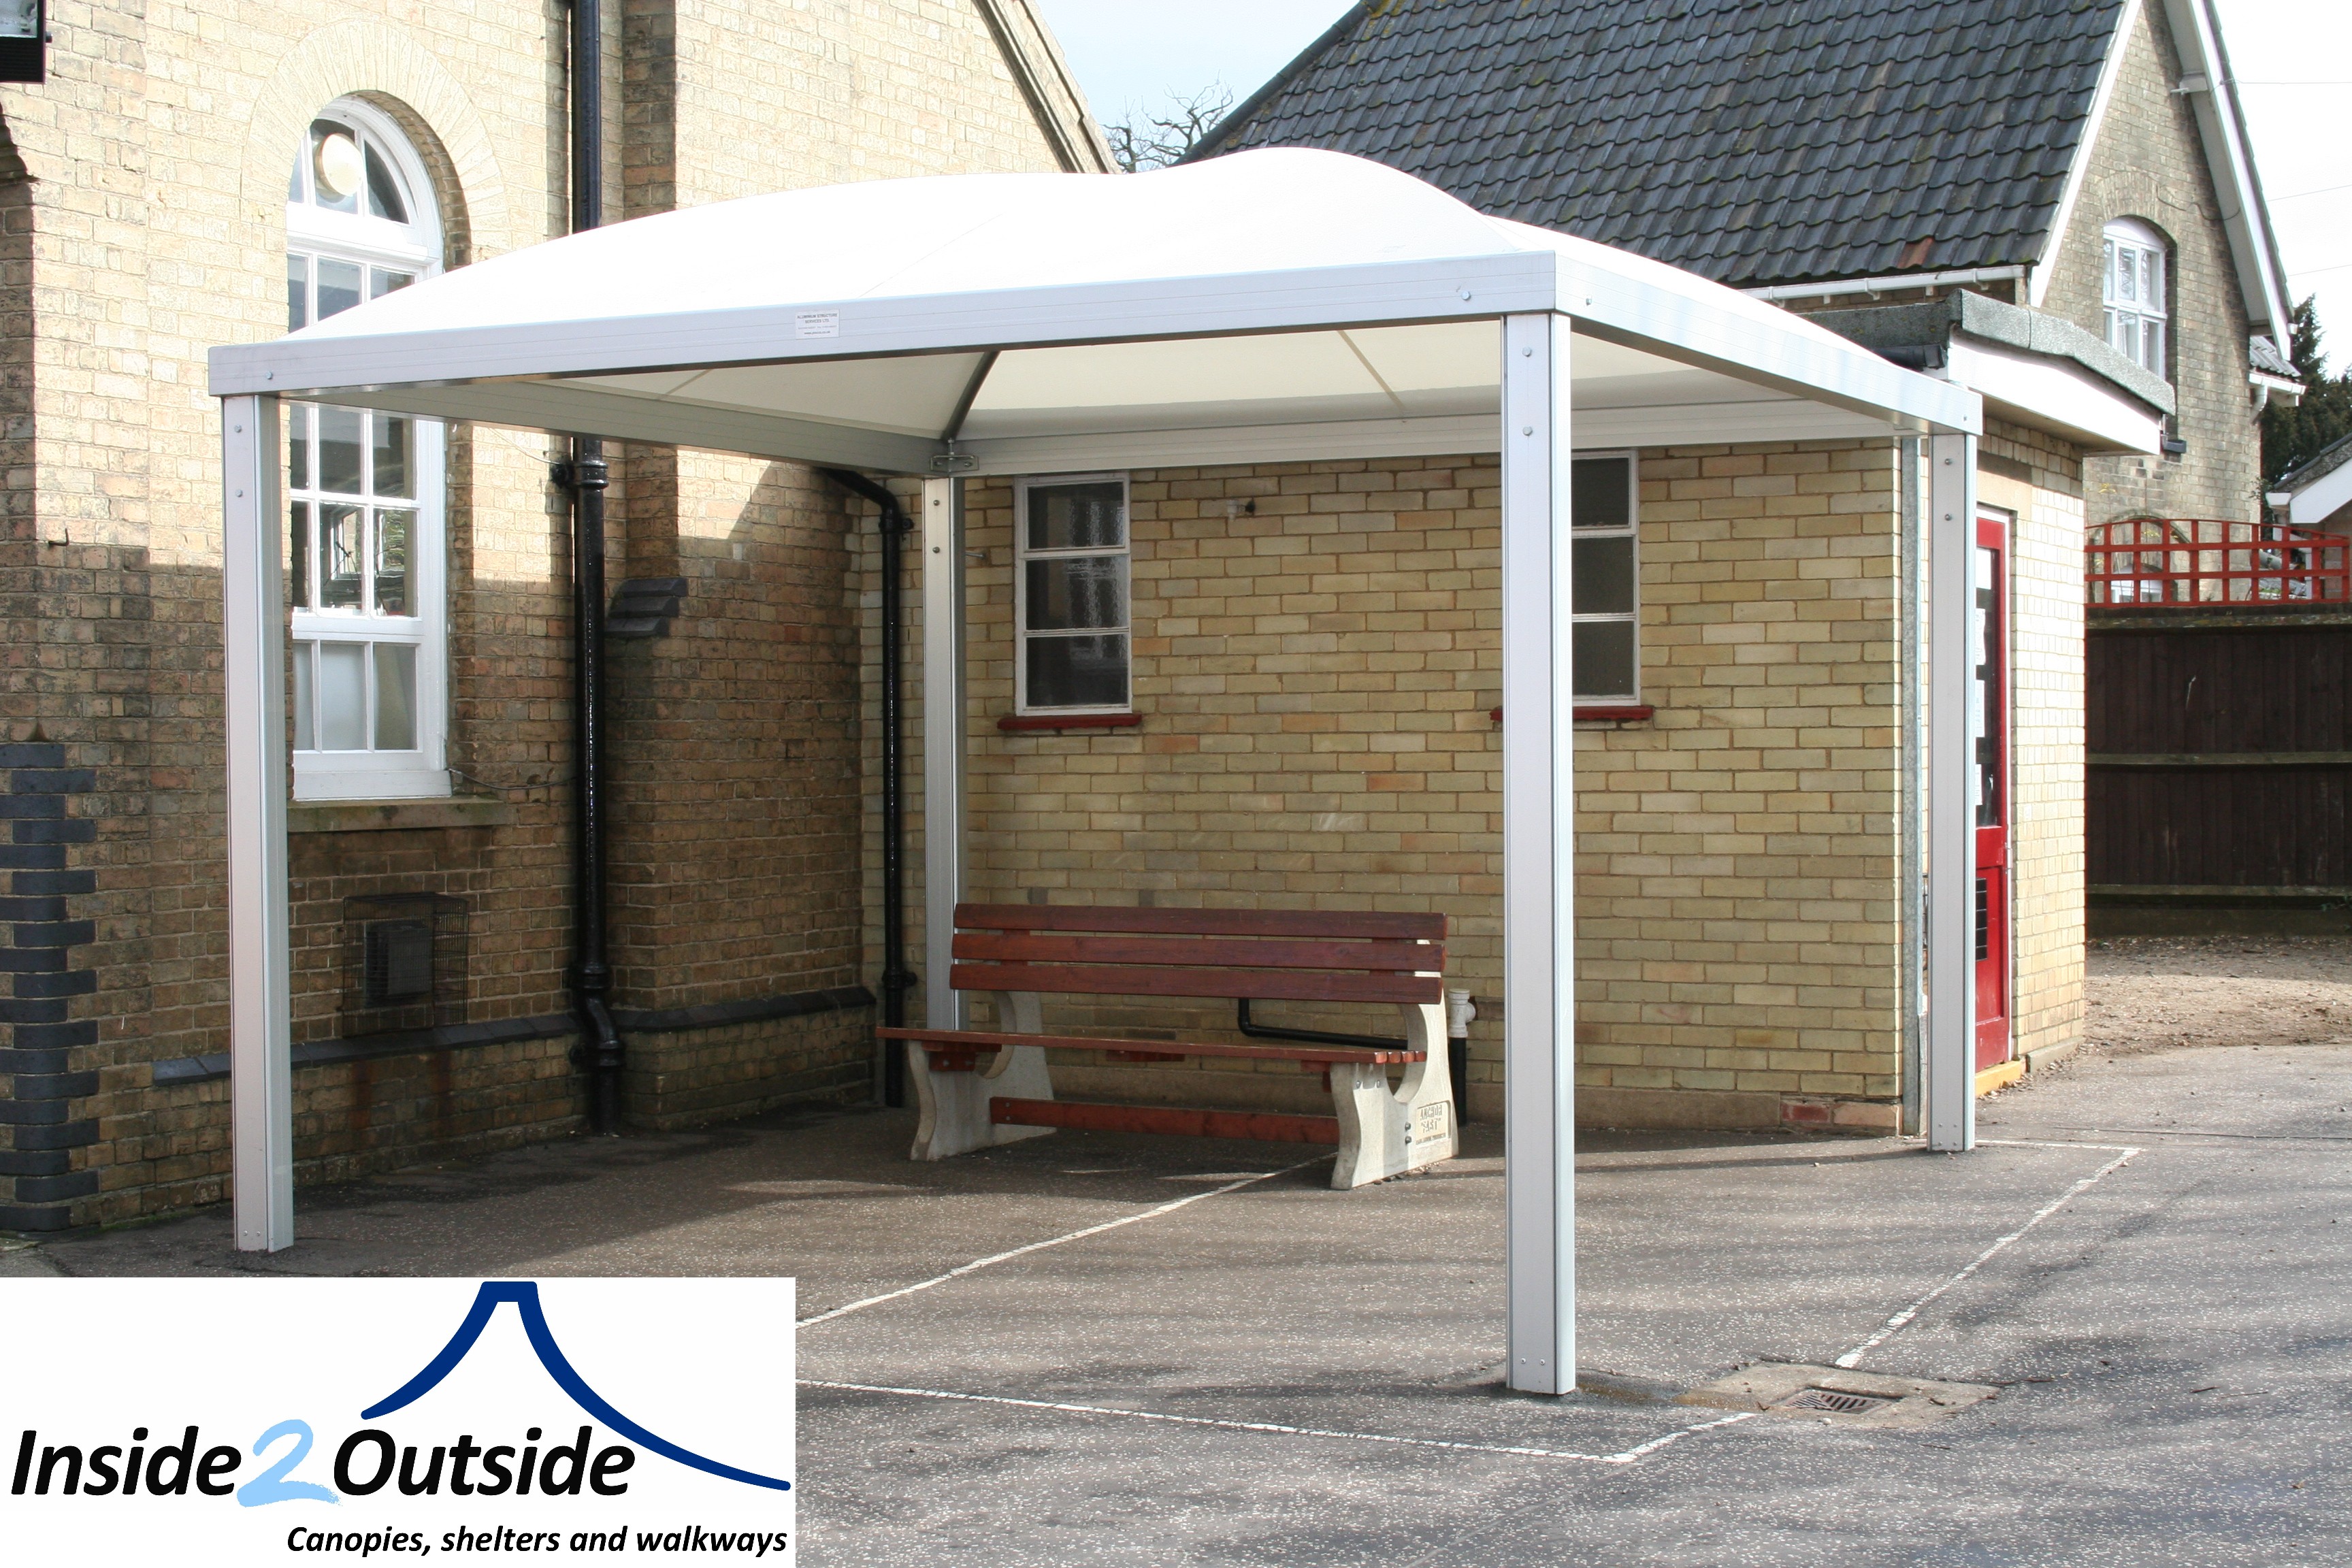 Win a best-selling school canopy in our free prize draw!